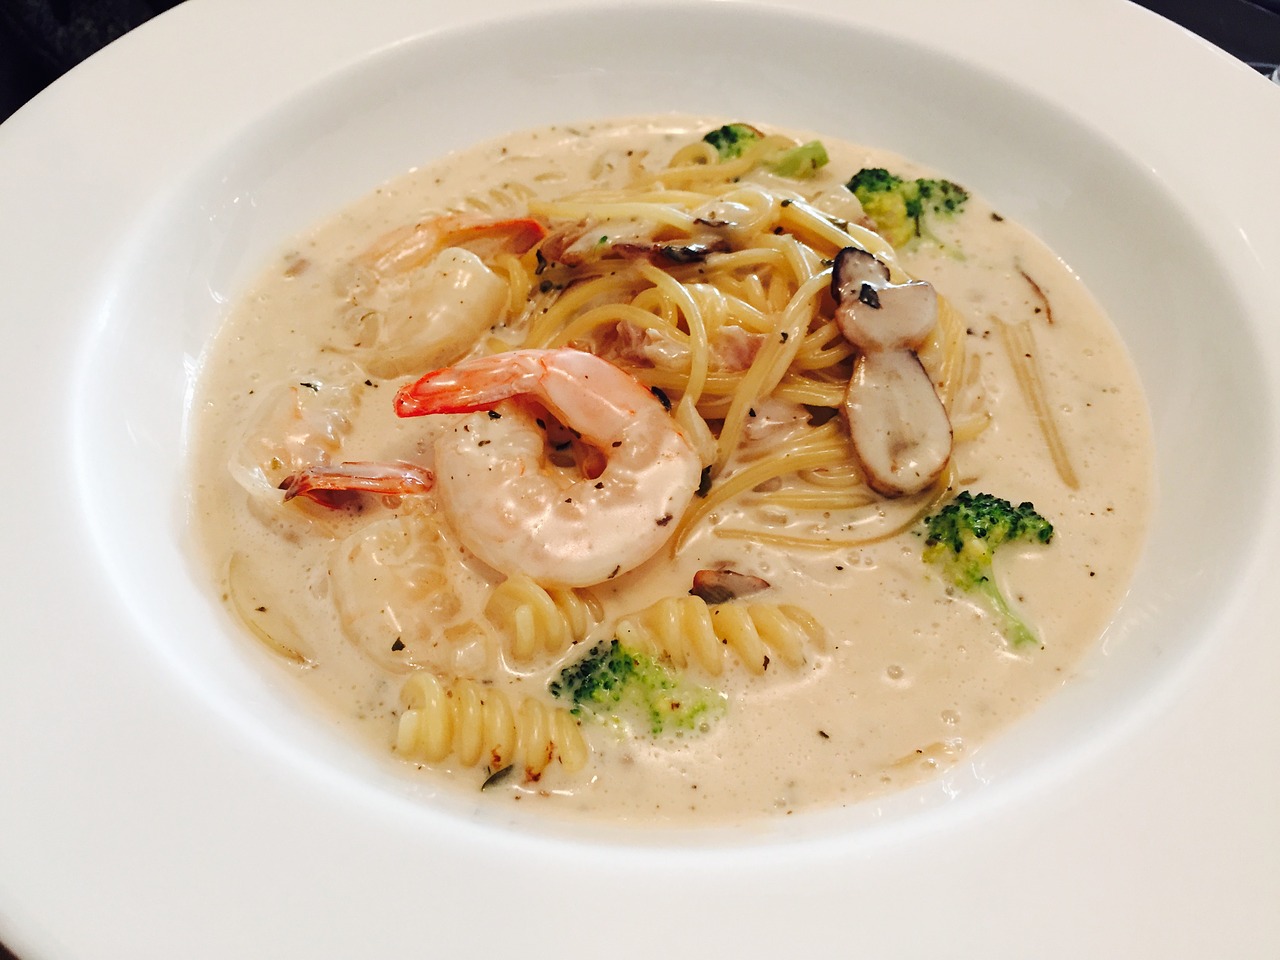 Shrimp Imperial With Pasta and Broccoli